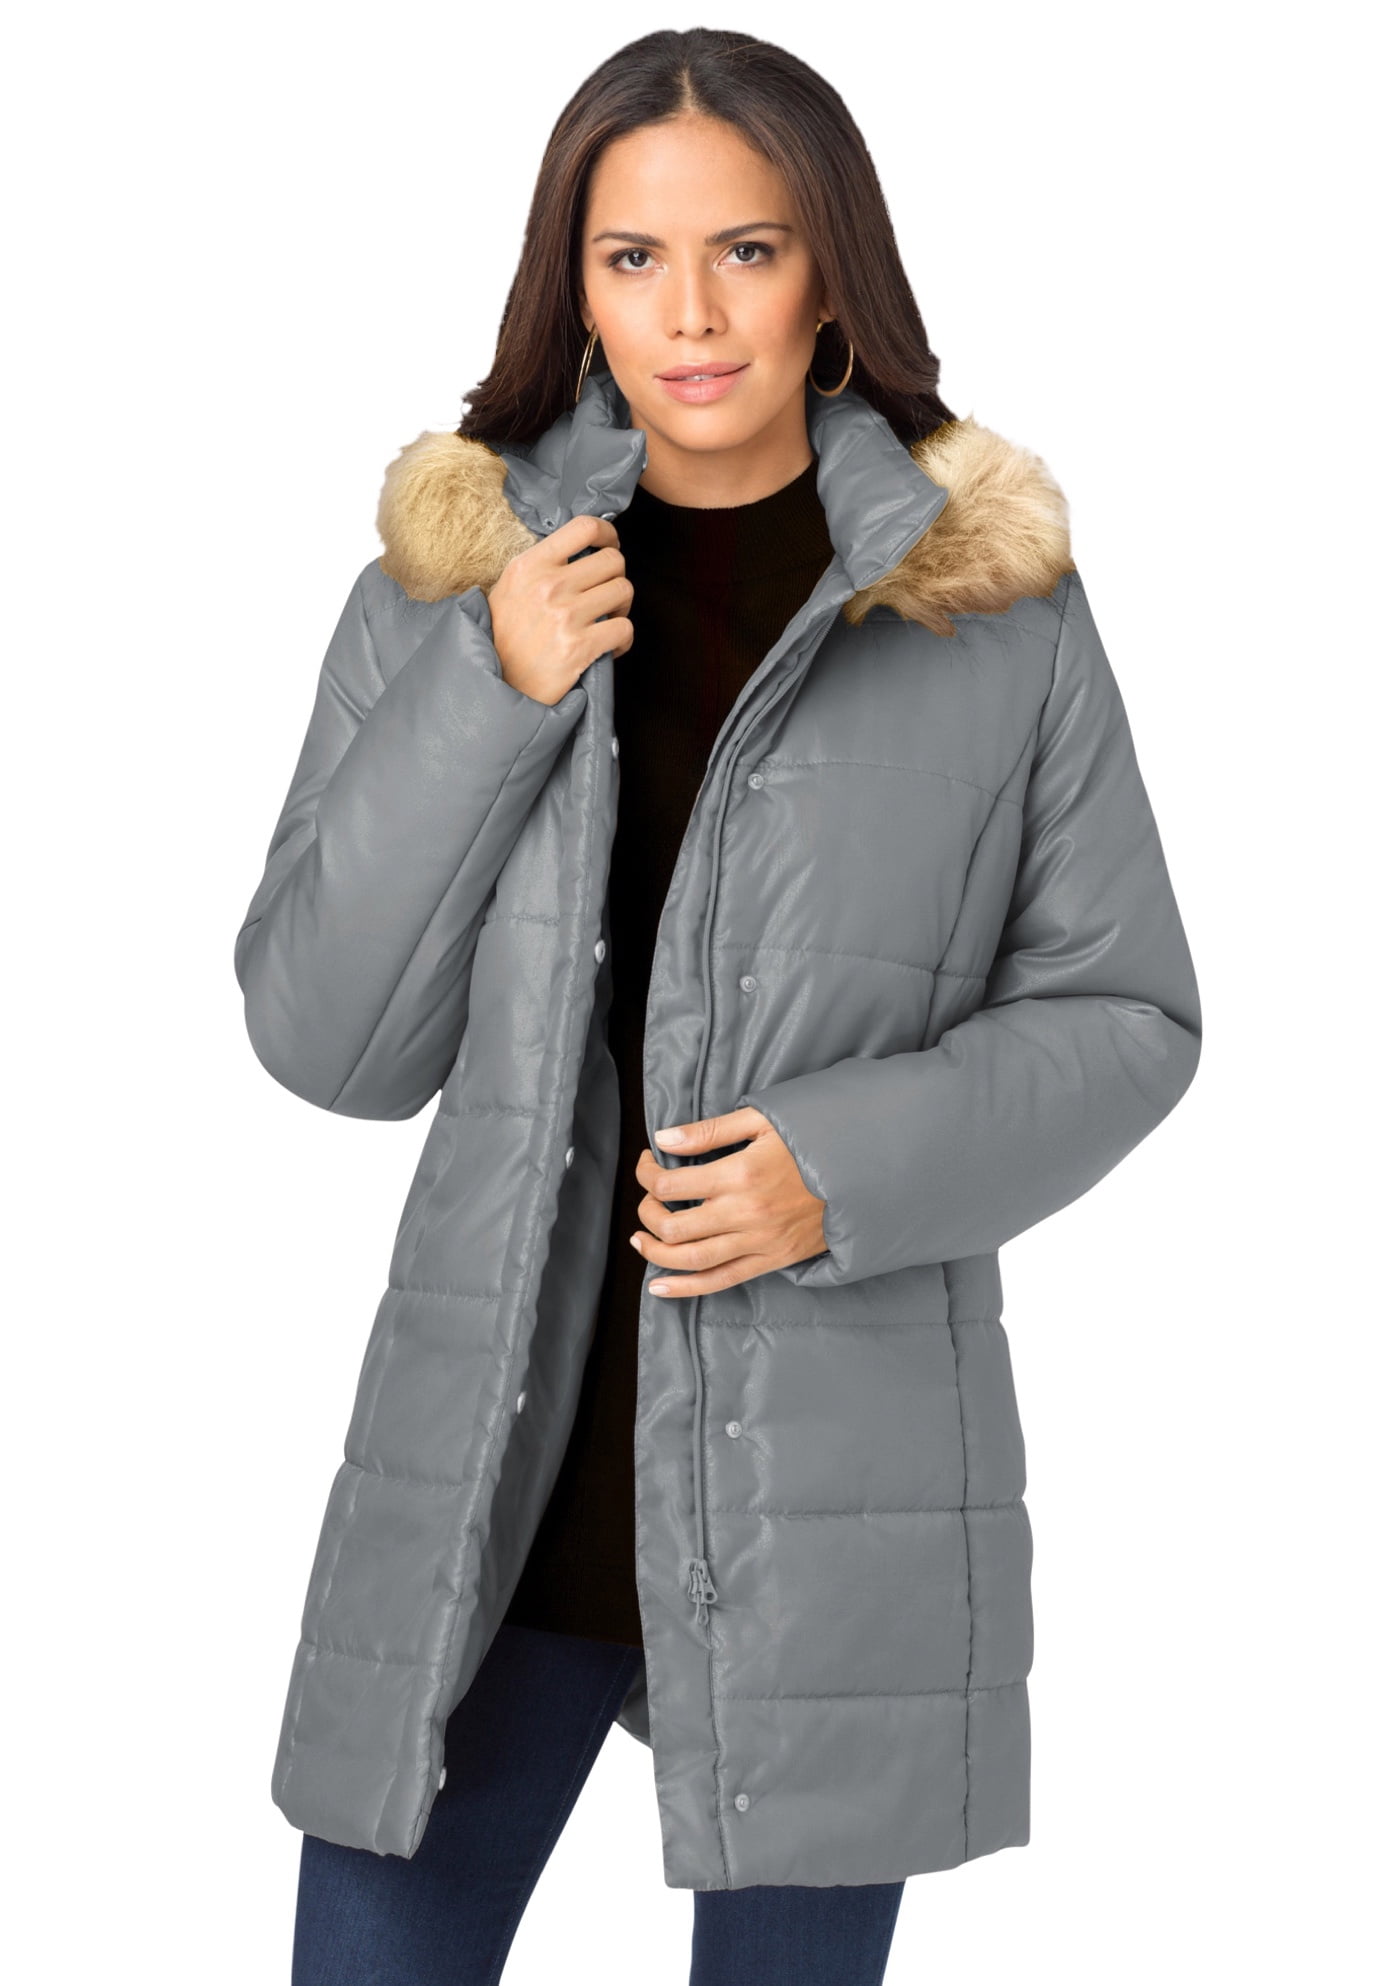 Women's Winter Puffer Jacket Removable Hood Long Down Parka Thermal Coats 